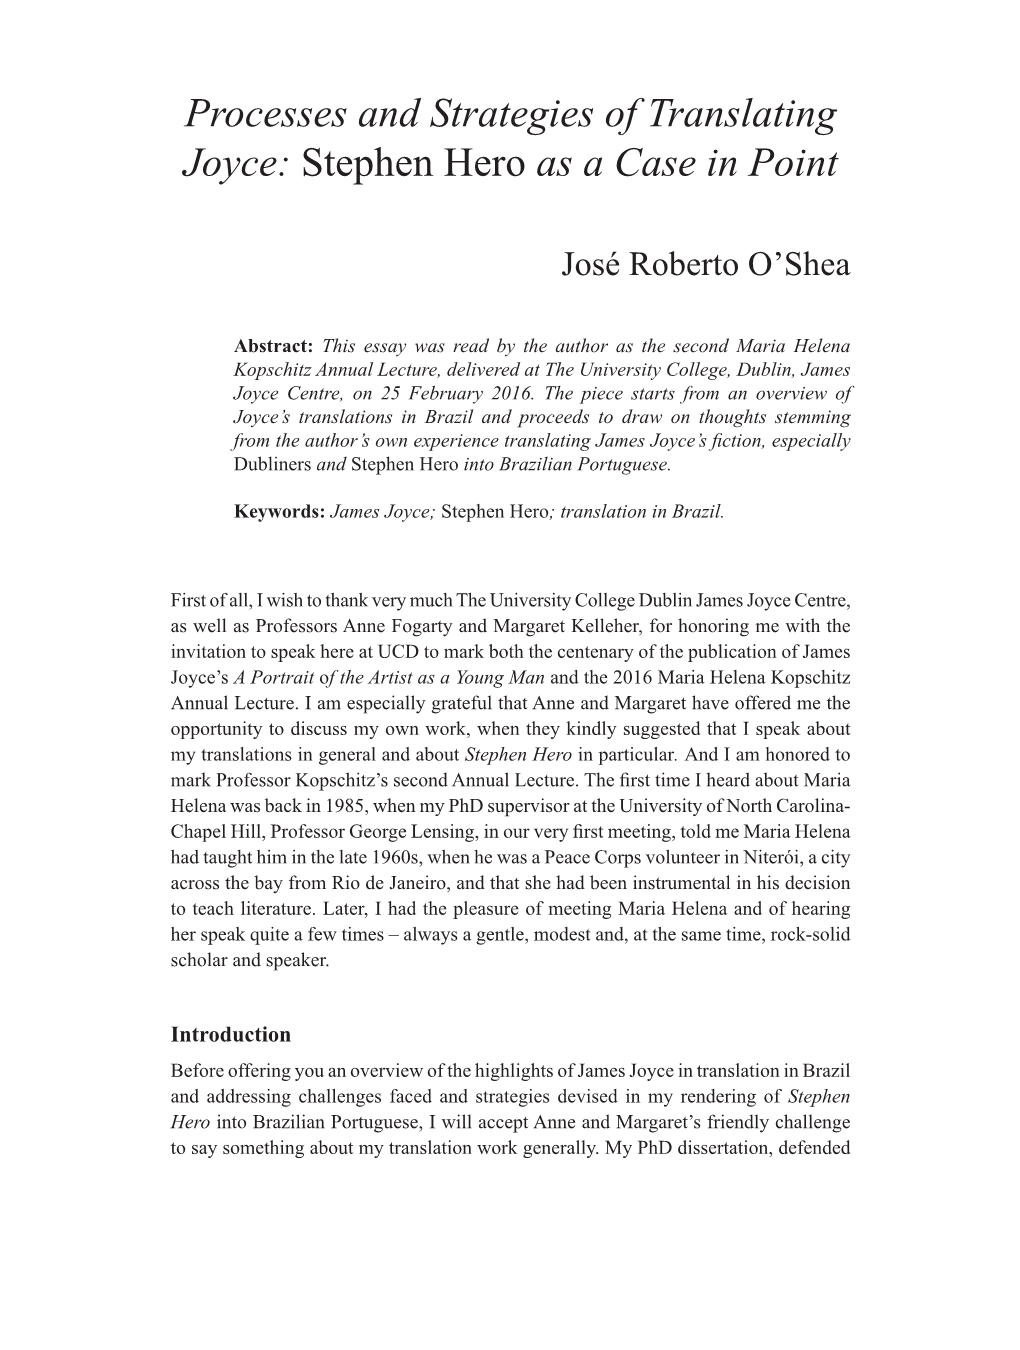 Processes and Strategies of Translating Joyce: Stephen Hero As a Case in Point